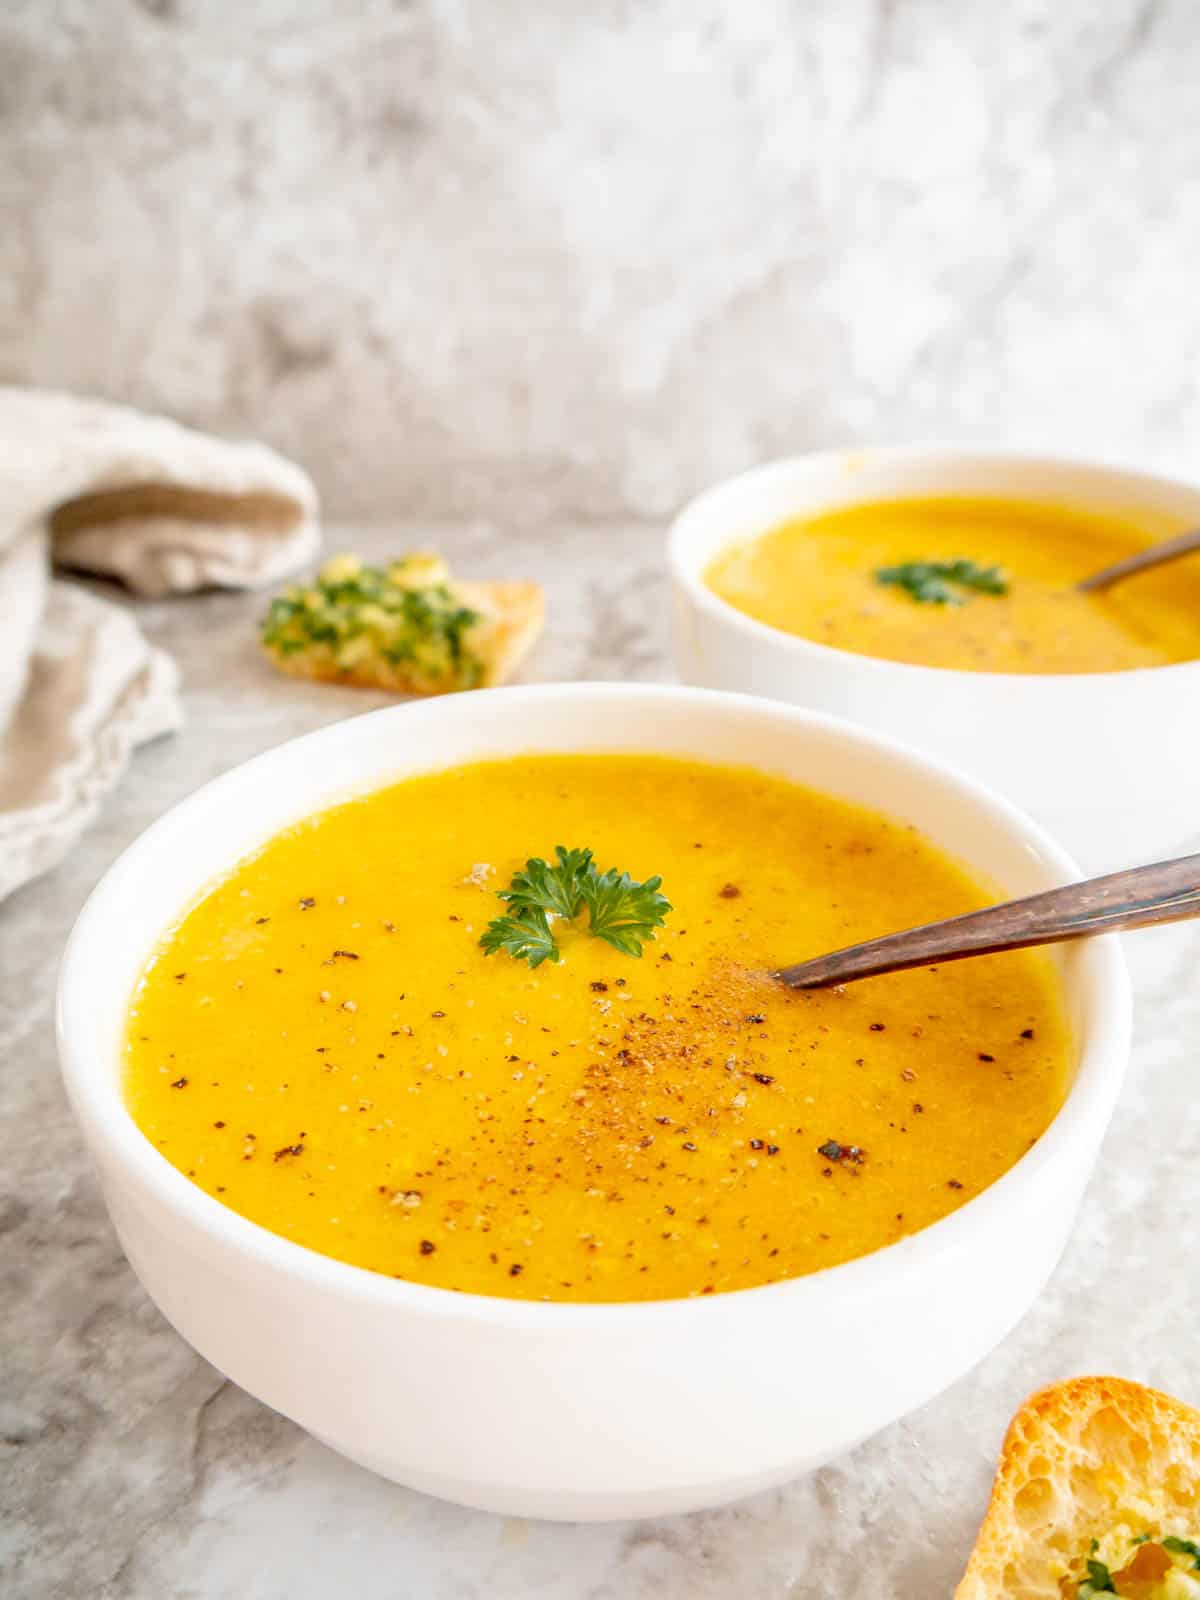 High protein butternut squash soup in a bowl with a spoon.